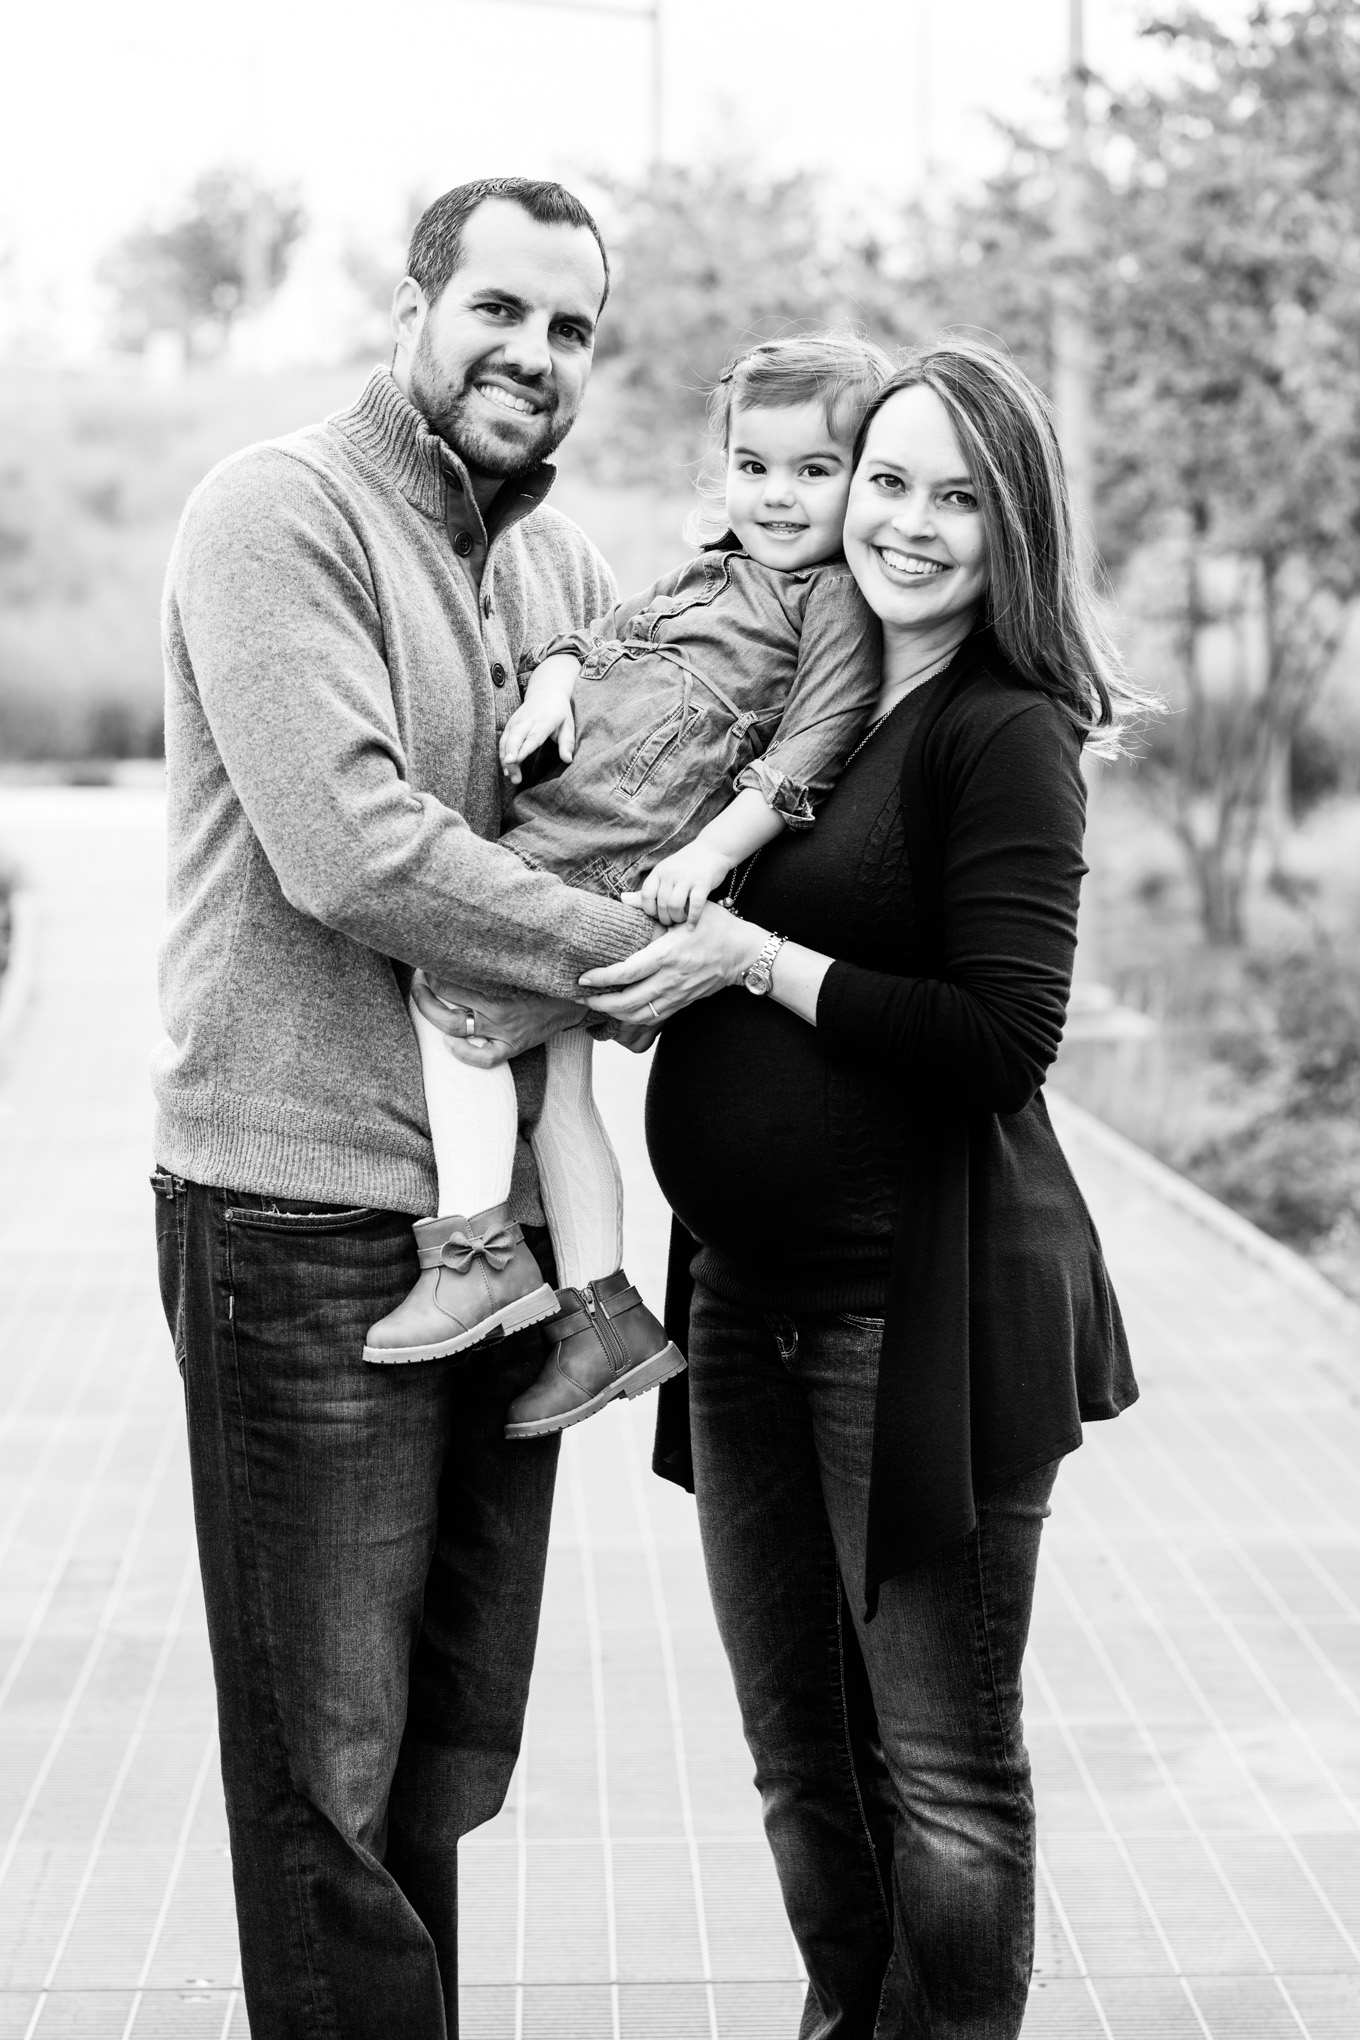 long bridge park family photos, family of three, toddler, little girl, baby bump, maternity photos, outdoor photos, holiday portraits, family portraits, northern Virginia, magic hour portraits, black and white family portrait